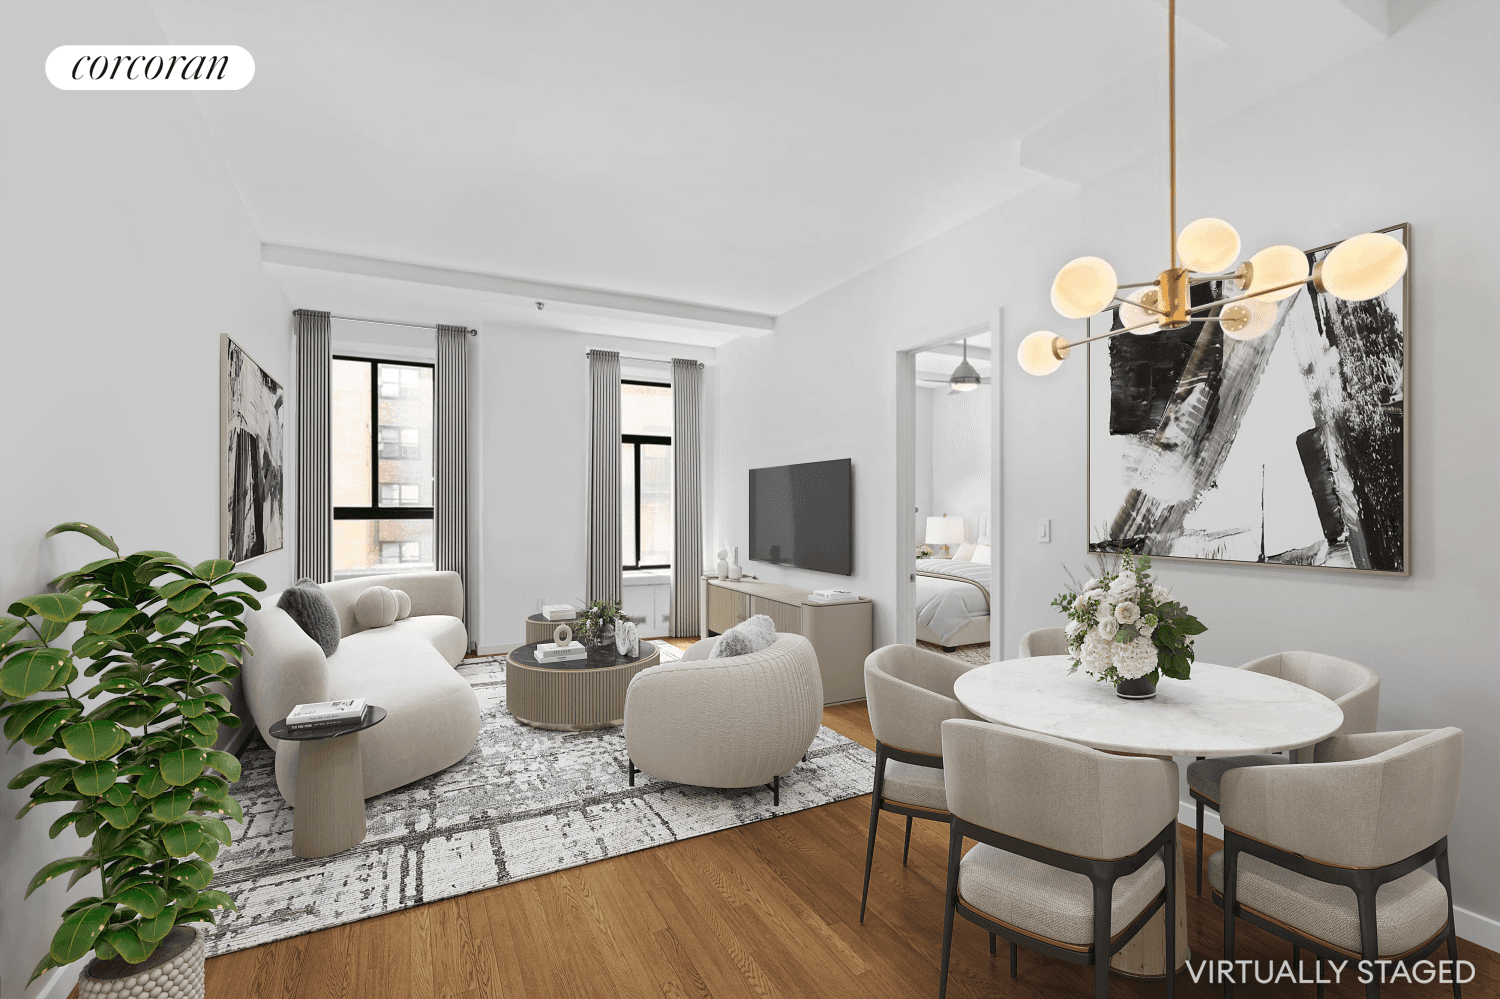 Welcome to 303 Mercer Street, Apartment A406, a quintessential Greenwich Village loft with soaring 10 foot ceilings offering a welcome respite from a bustling city.